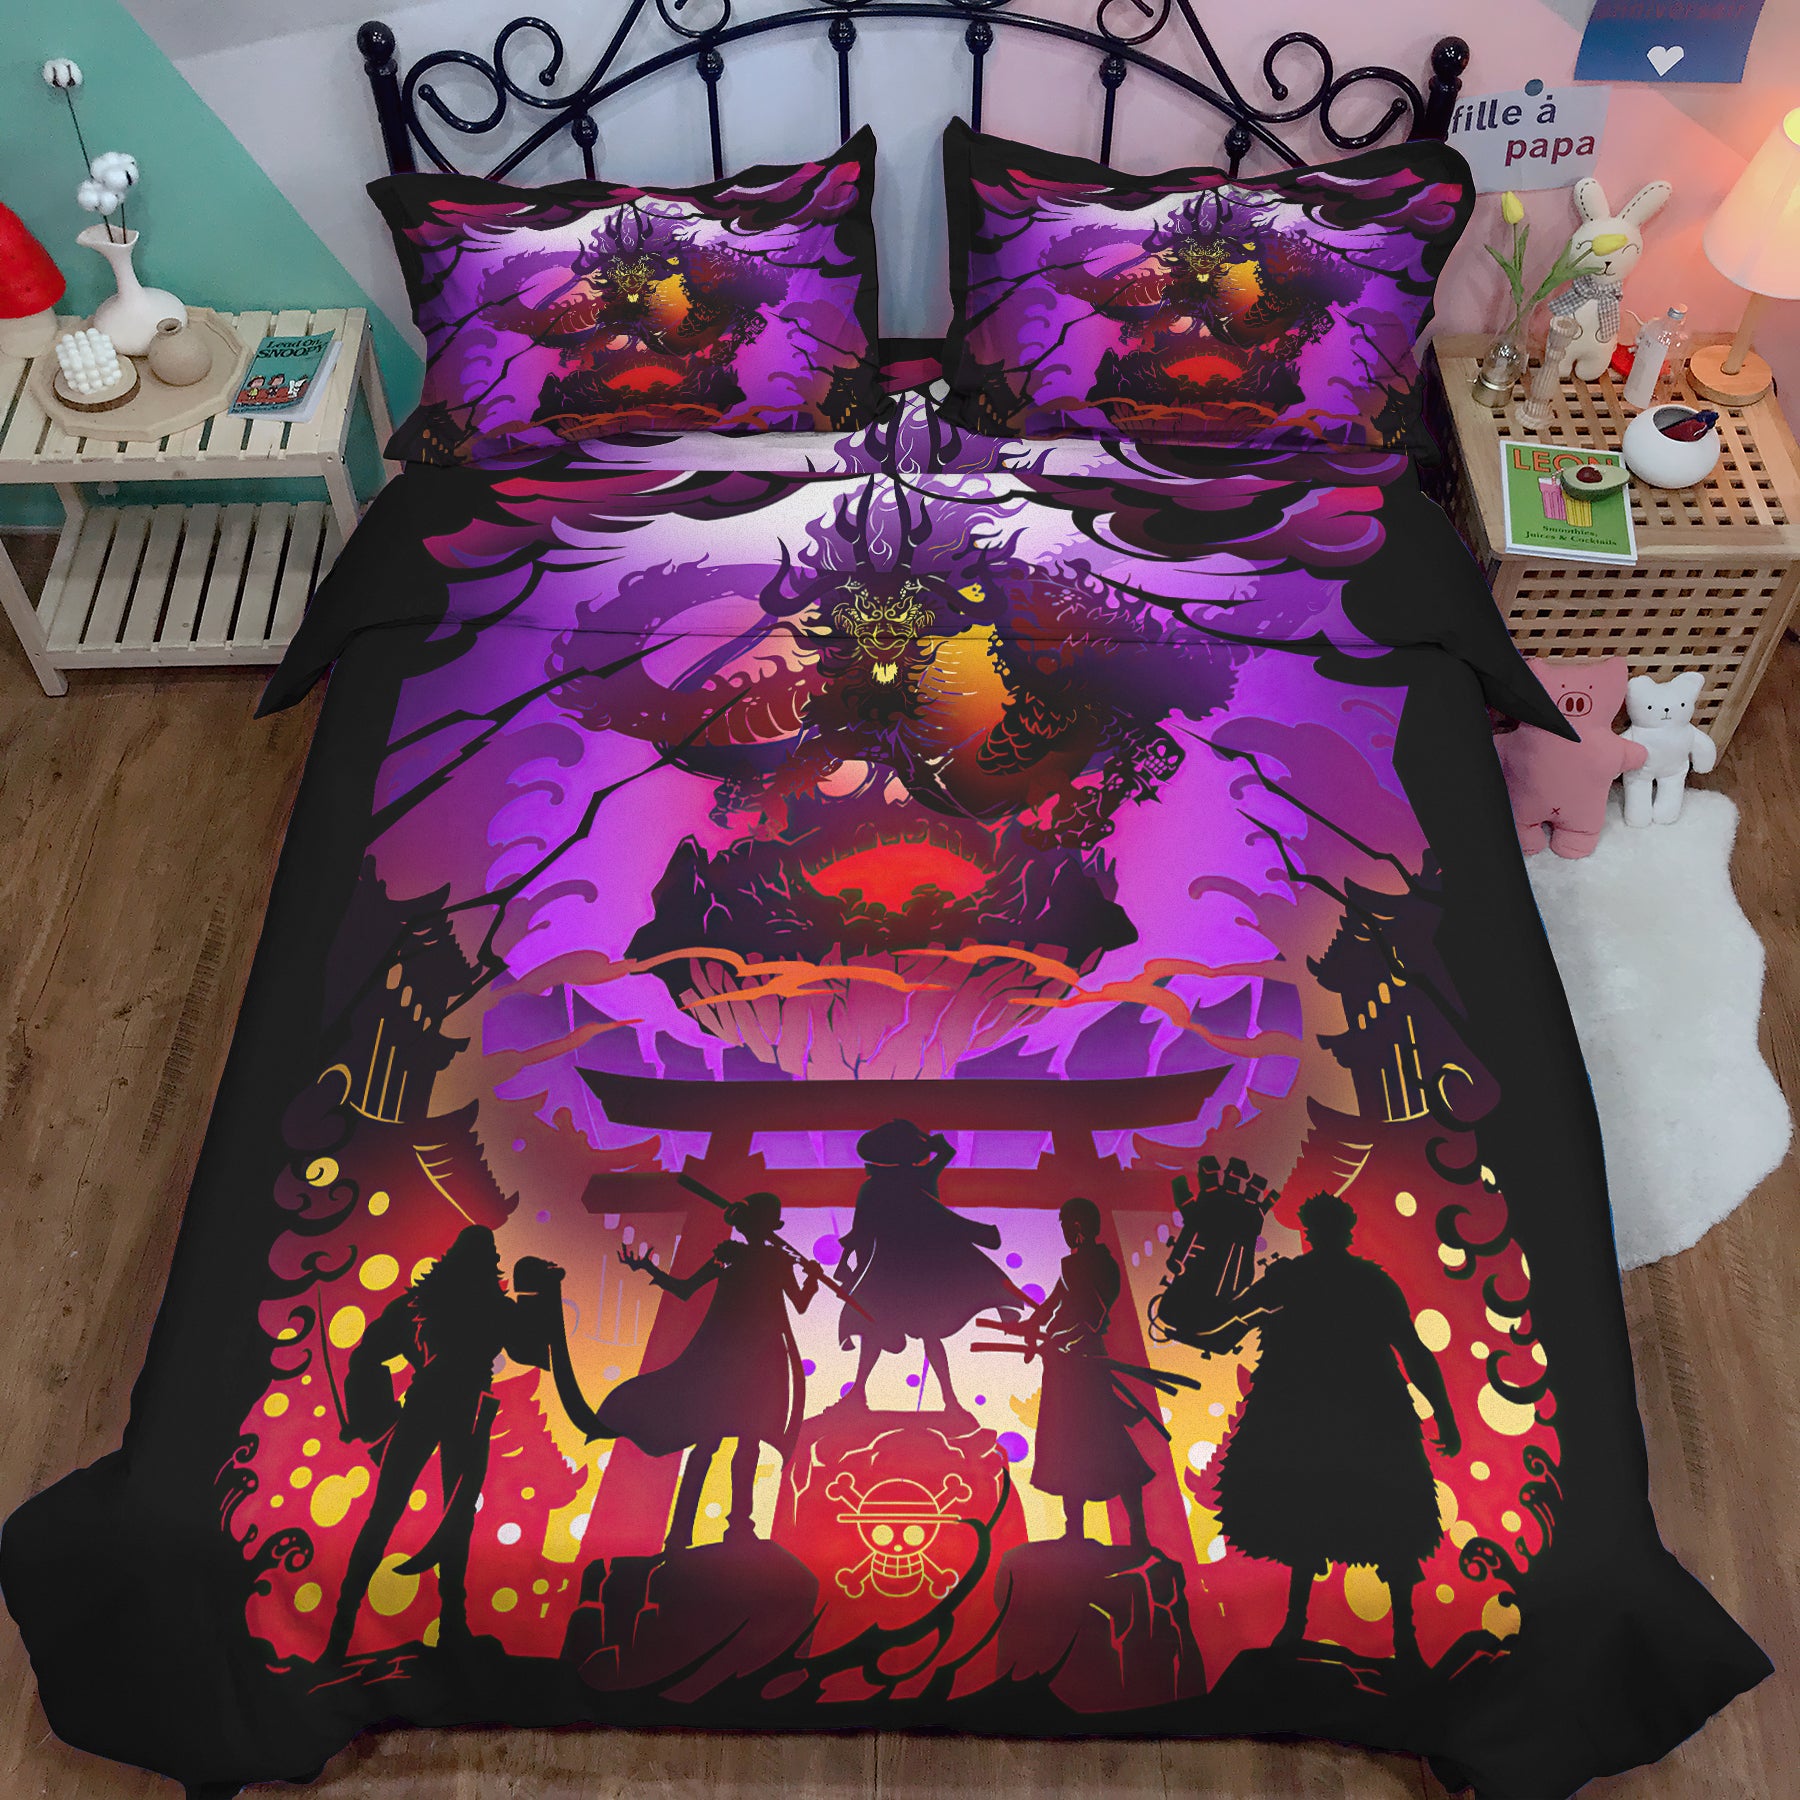 One Piece Anime Bedding Set Duvet Cover And 2 Pillowcases